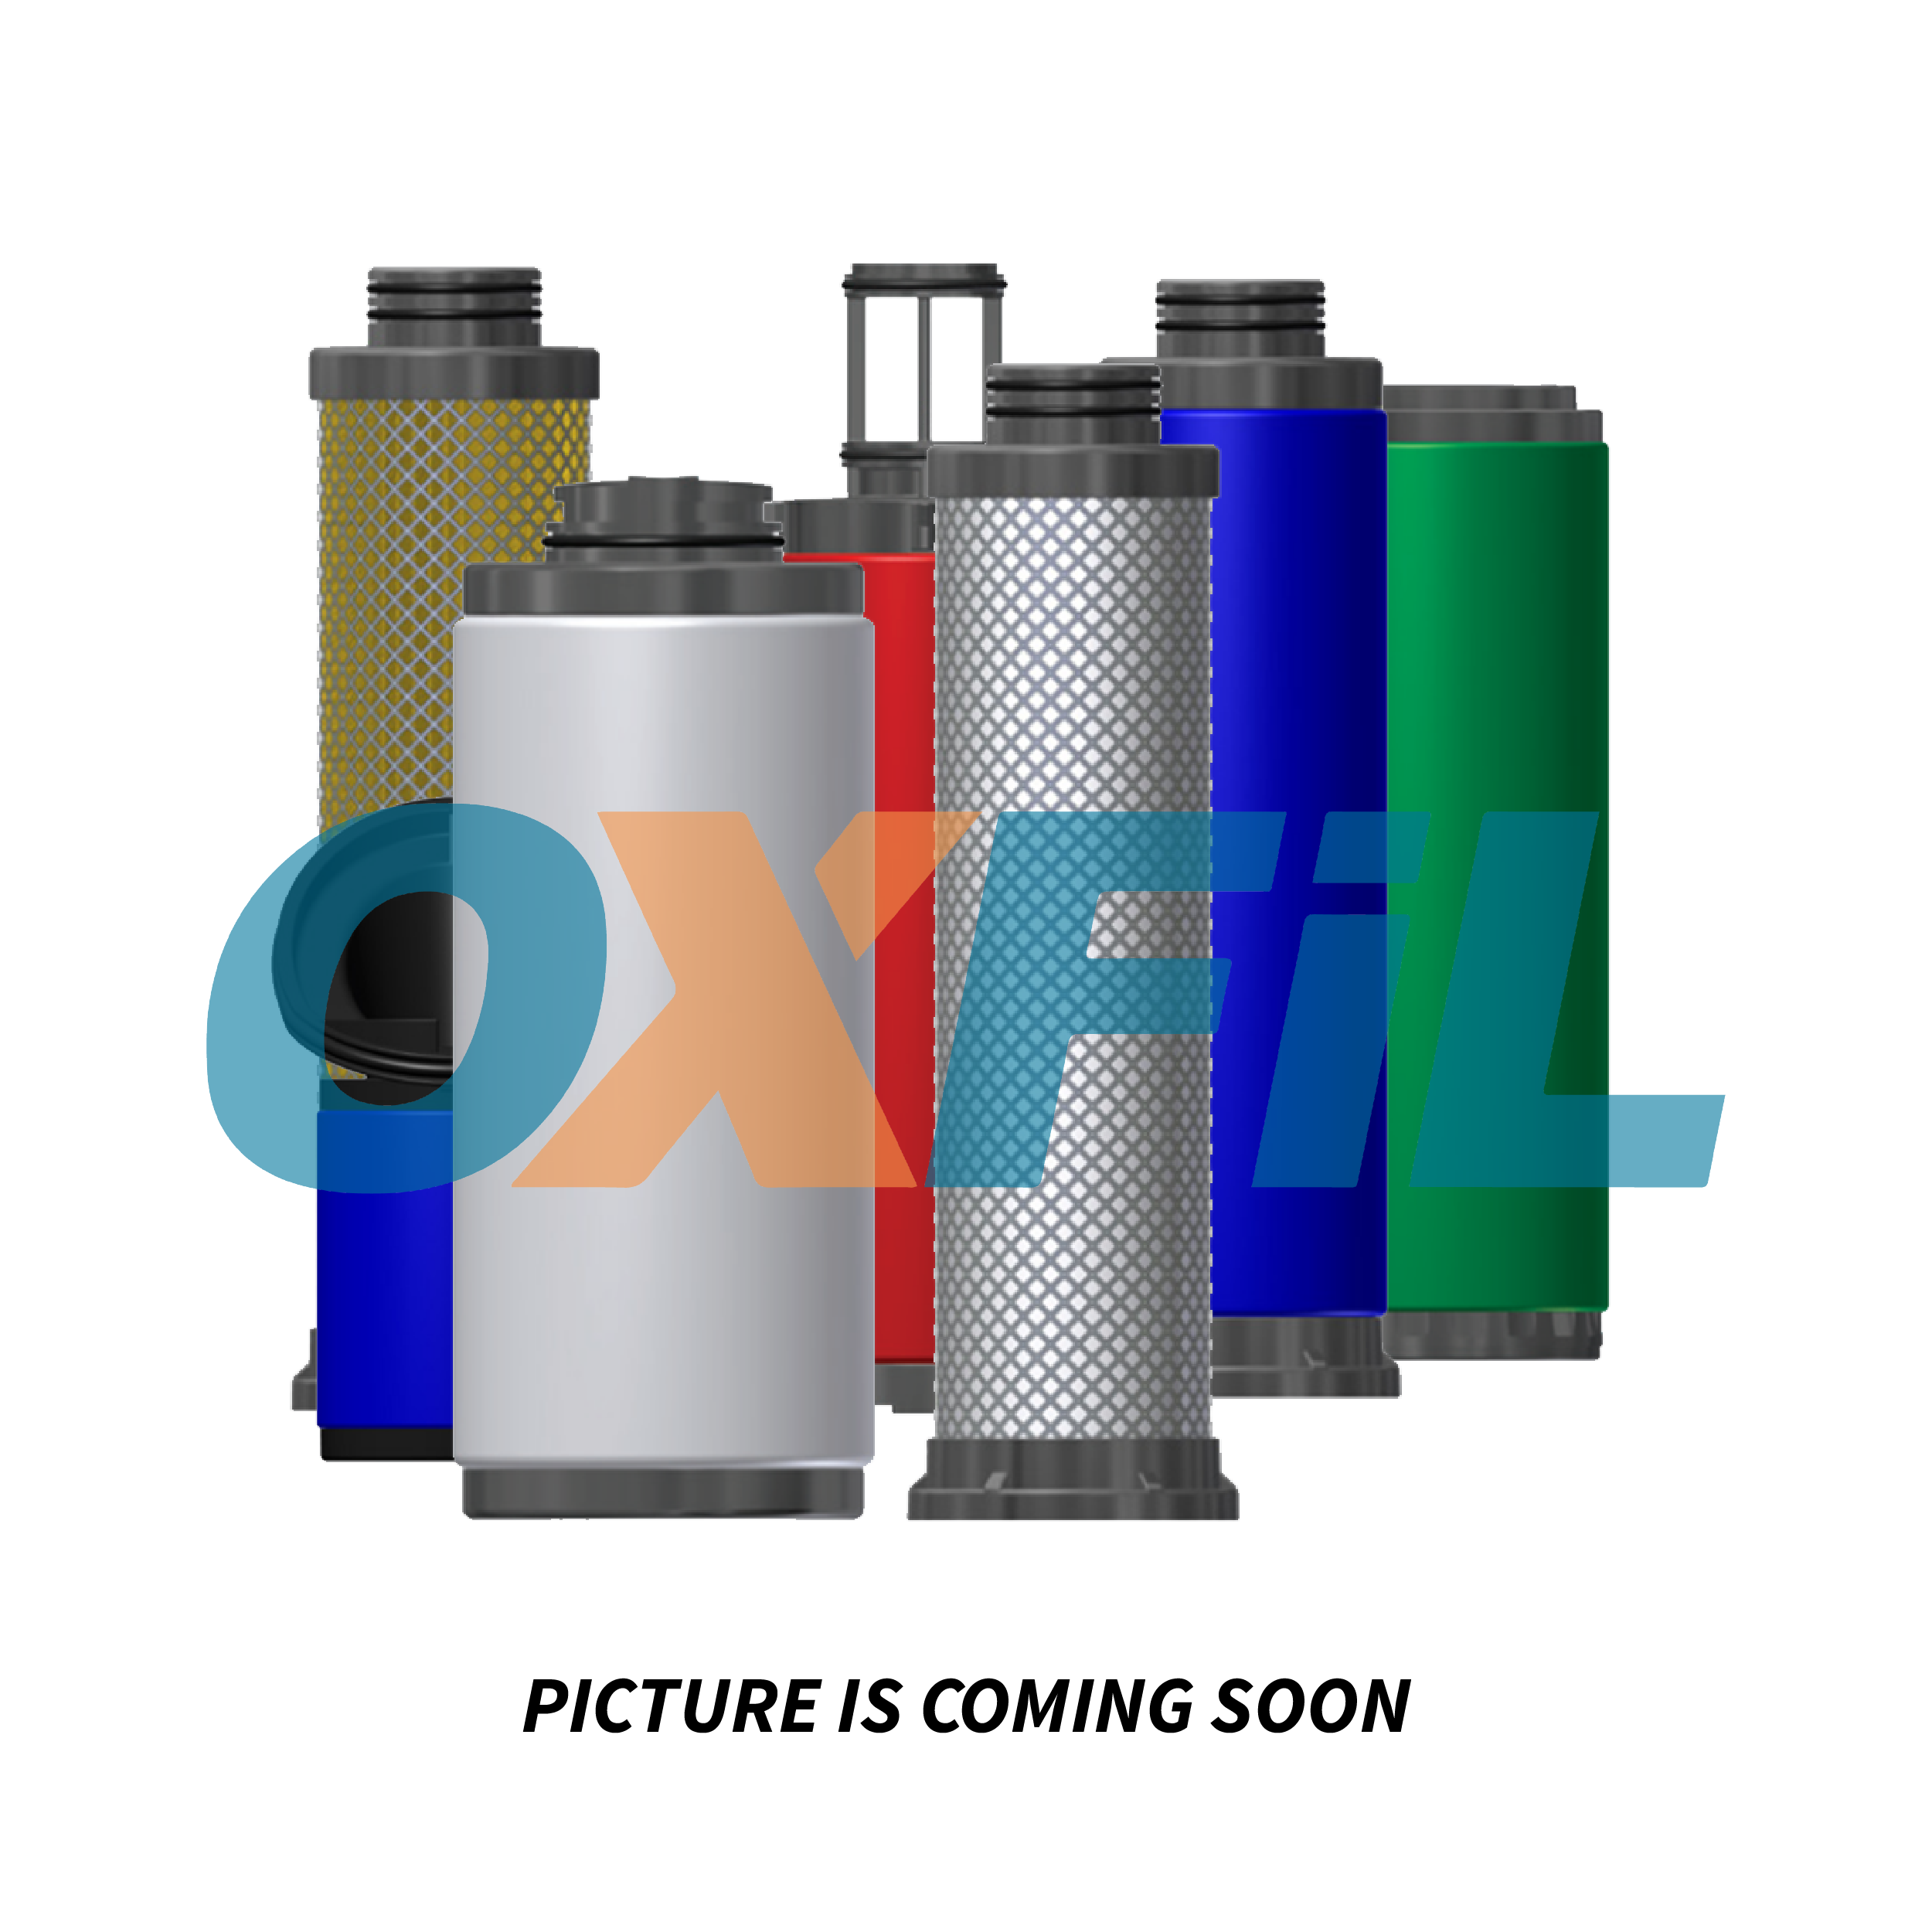 Related product IF.4154 - In-line Filter